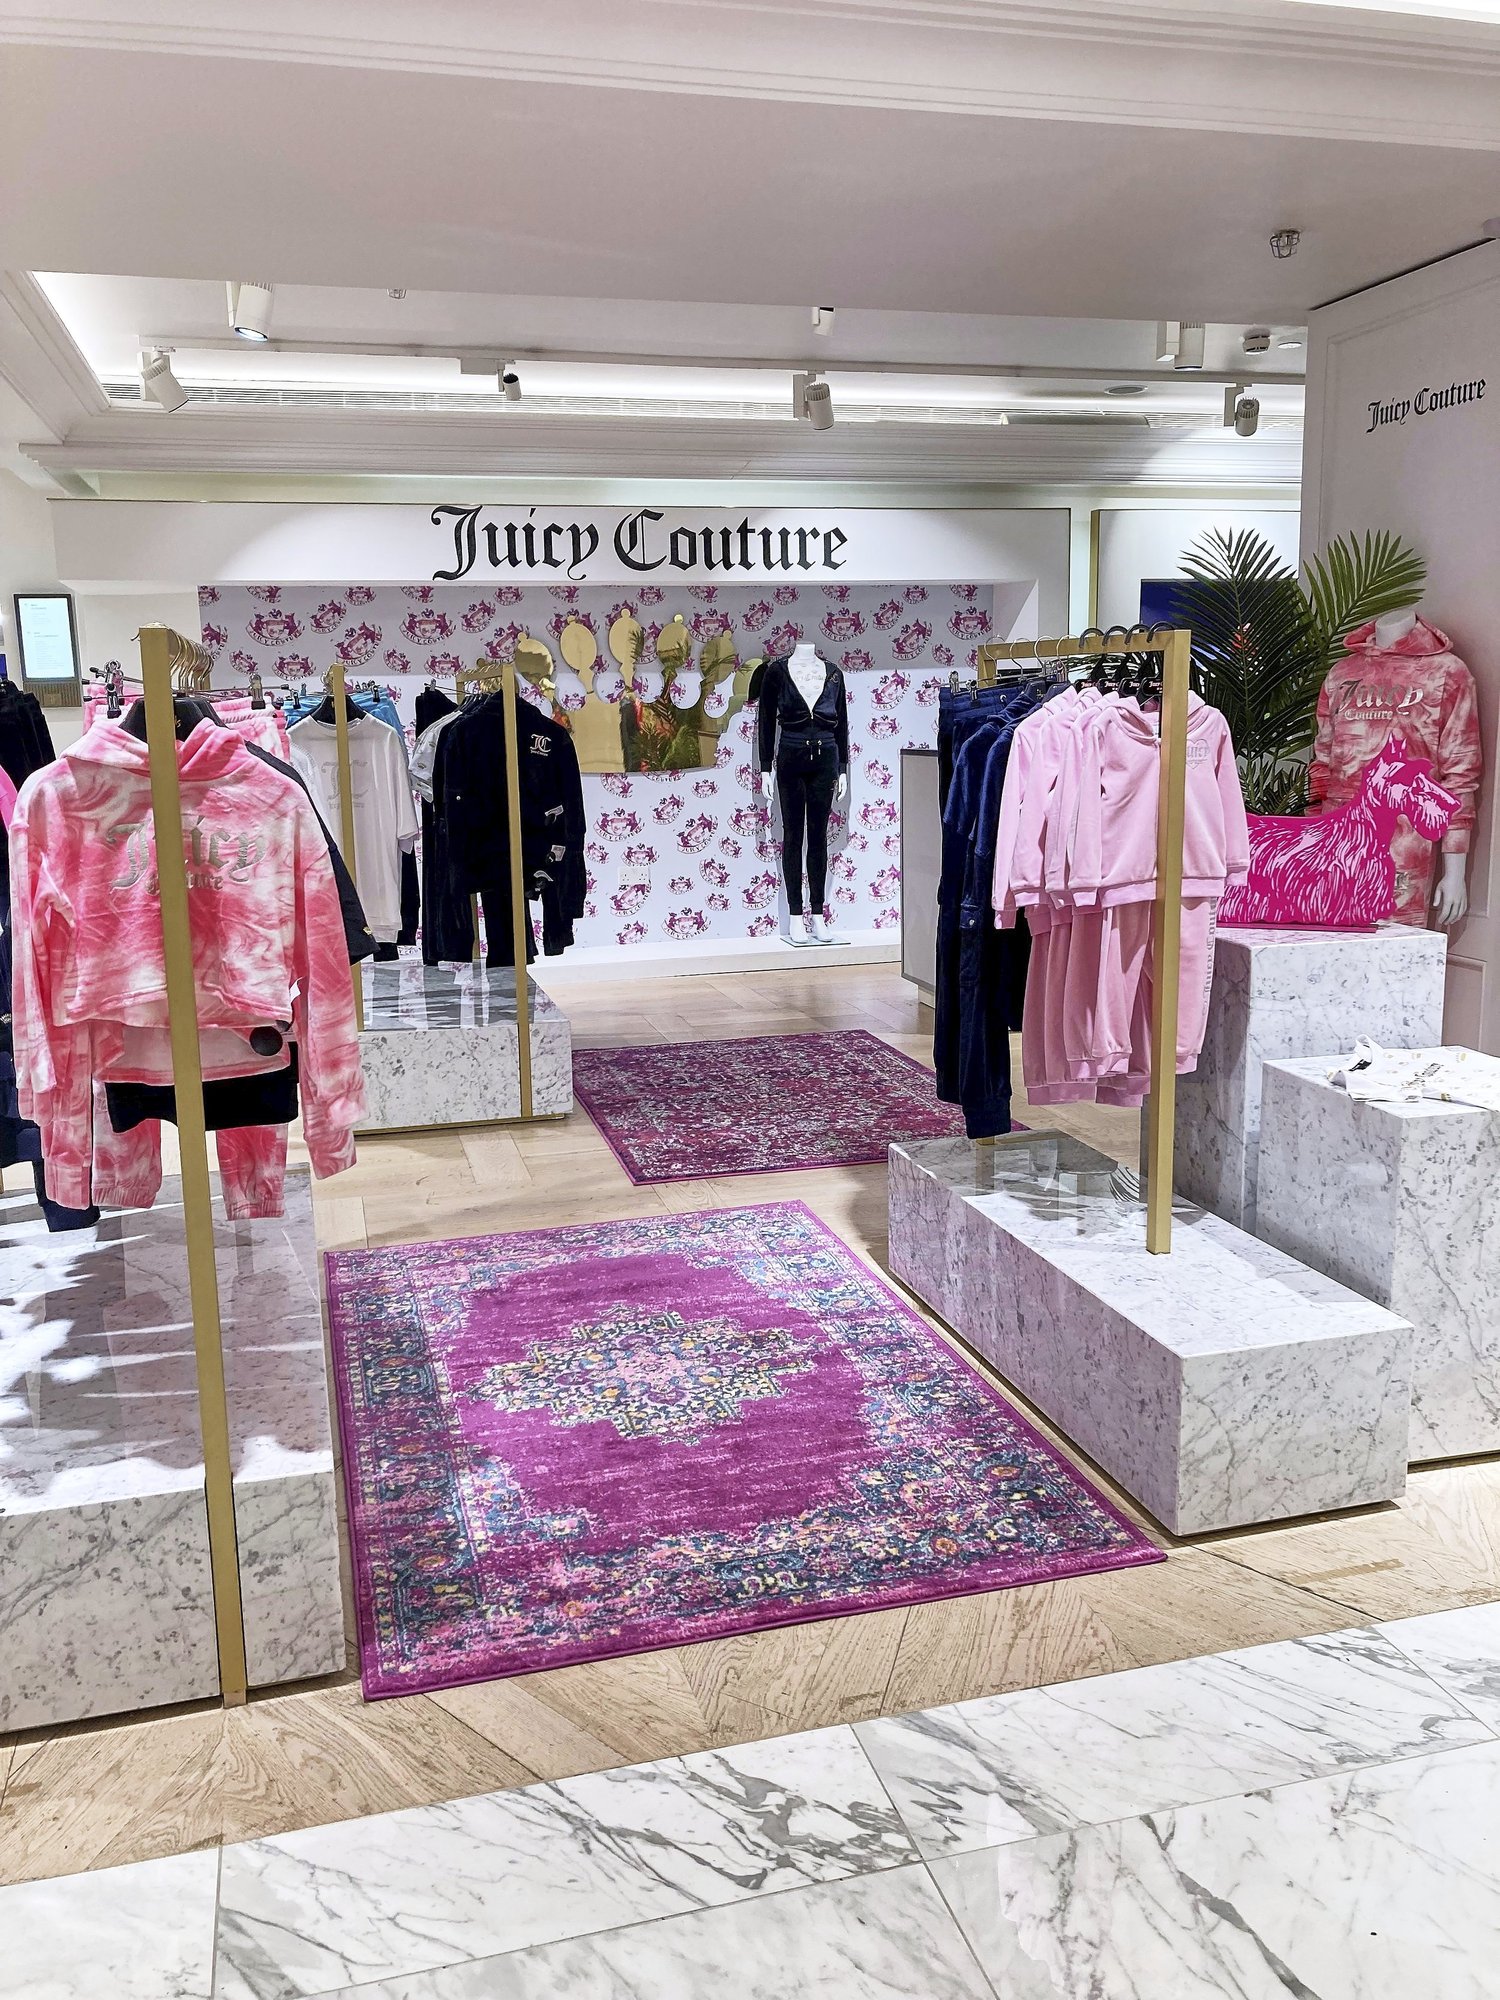 Juicy Couture Girls launches in Harrods Knightsbridge this week